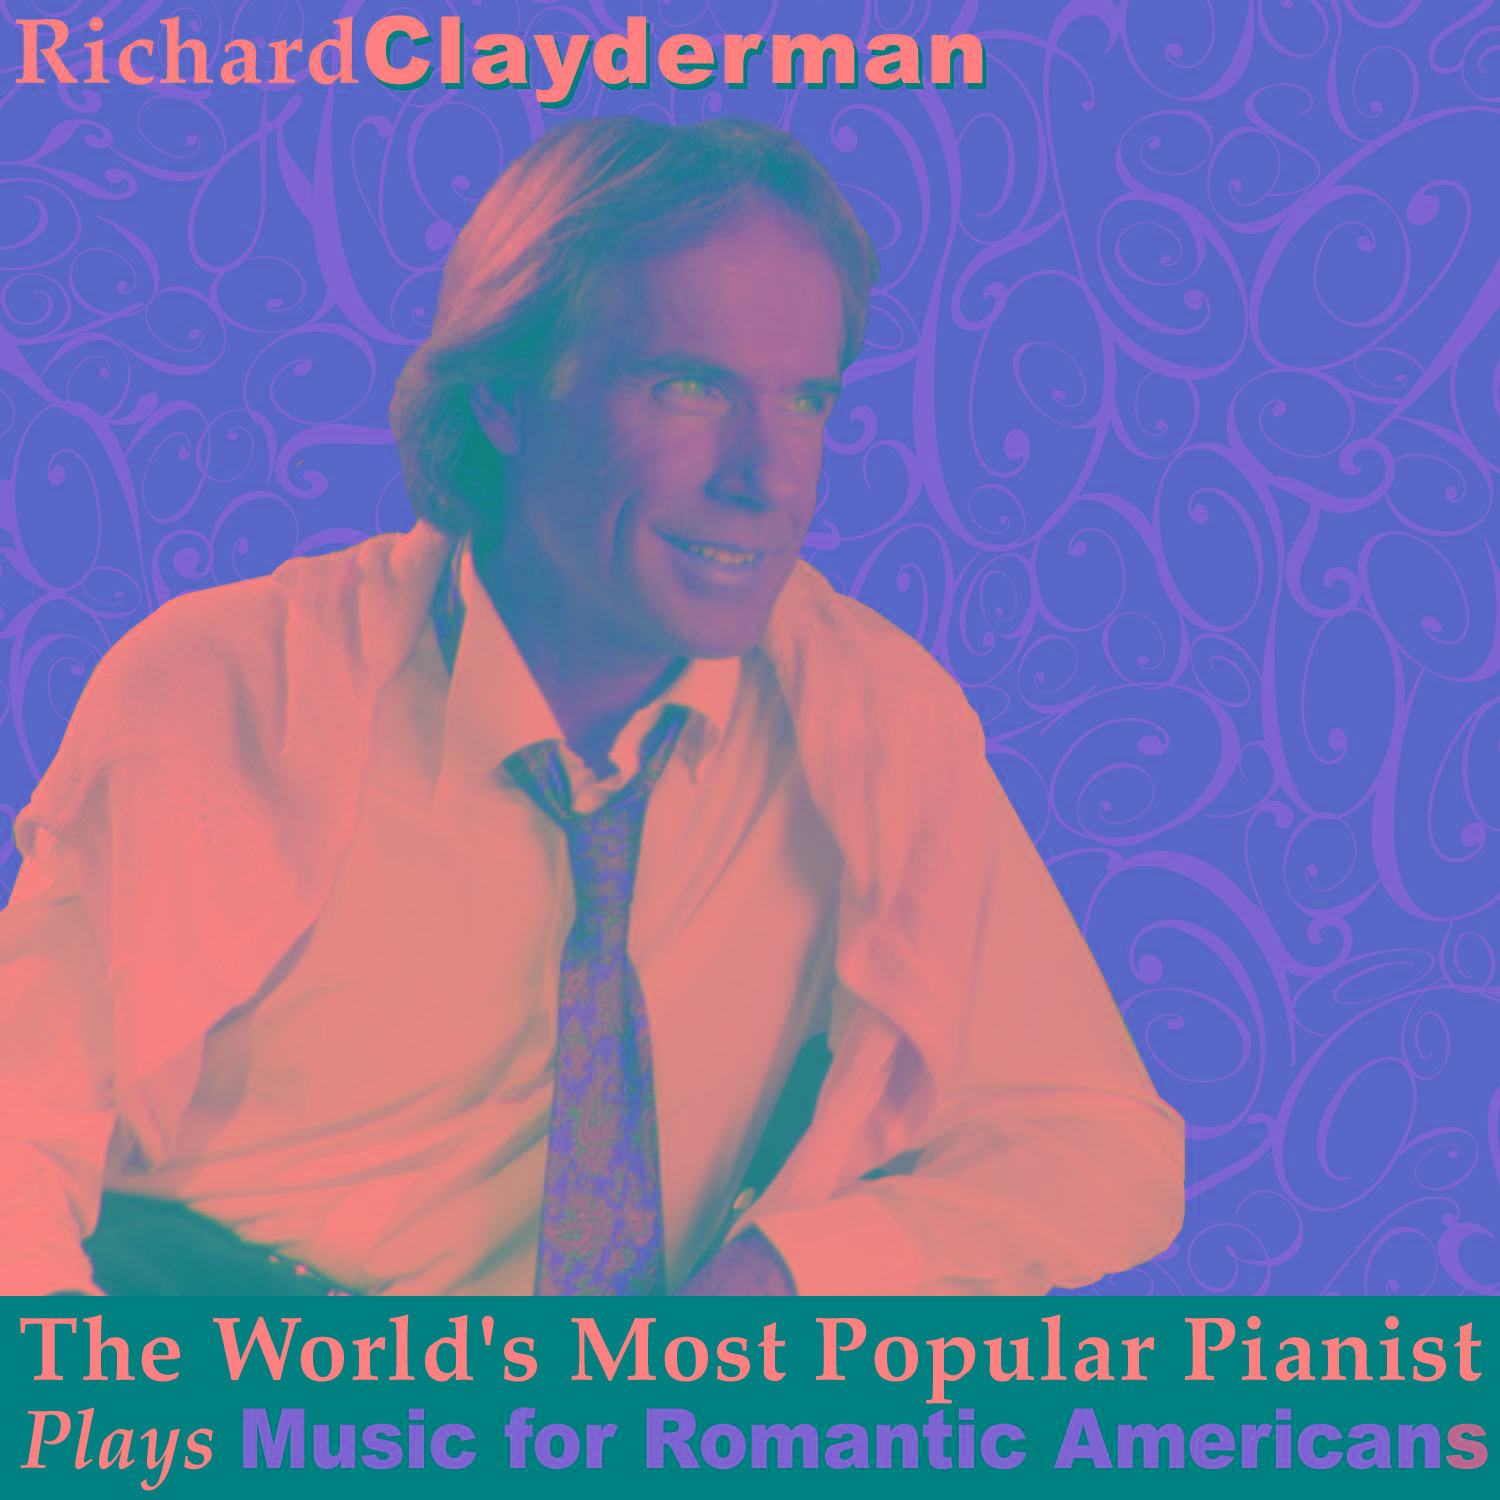 The World's Most Popular Pianist Plays Music for Romantic Americans